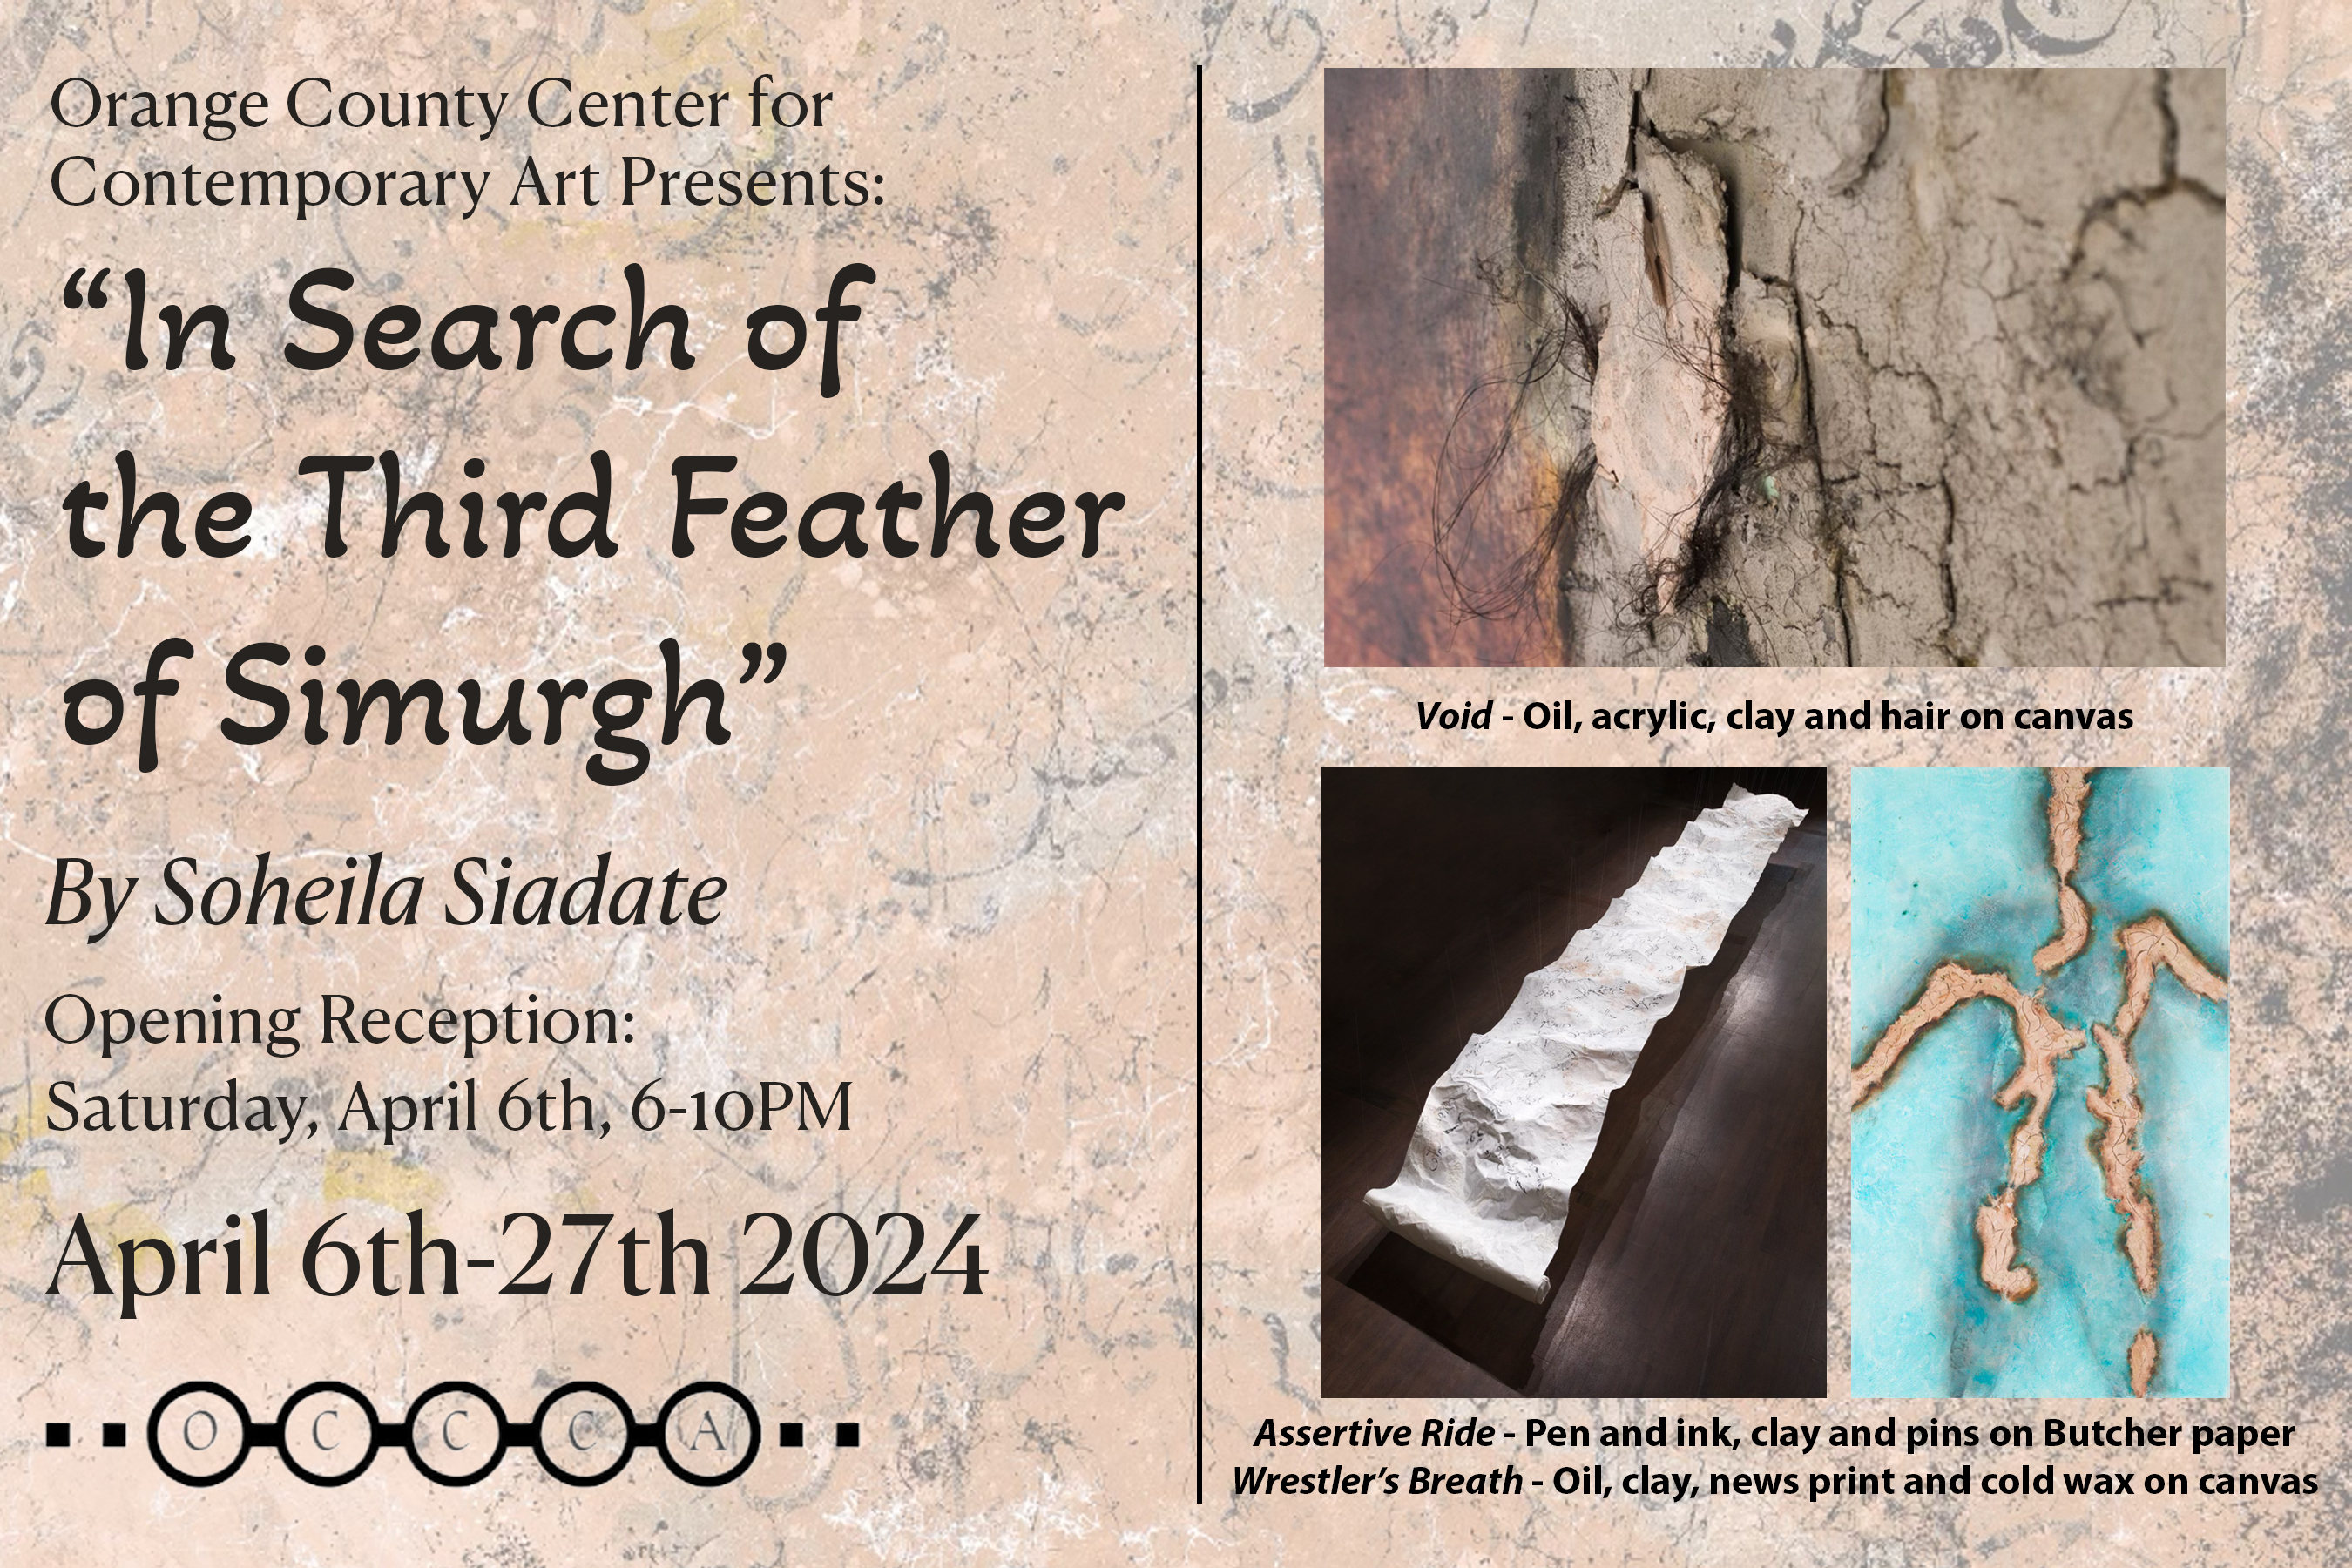 In Search of the Third Feather exhibition postcard image